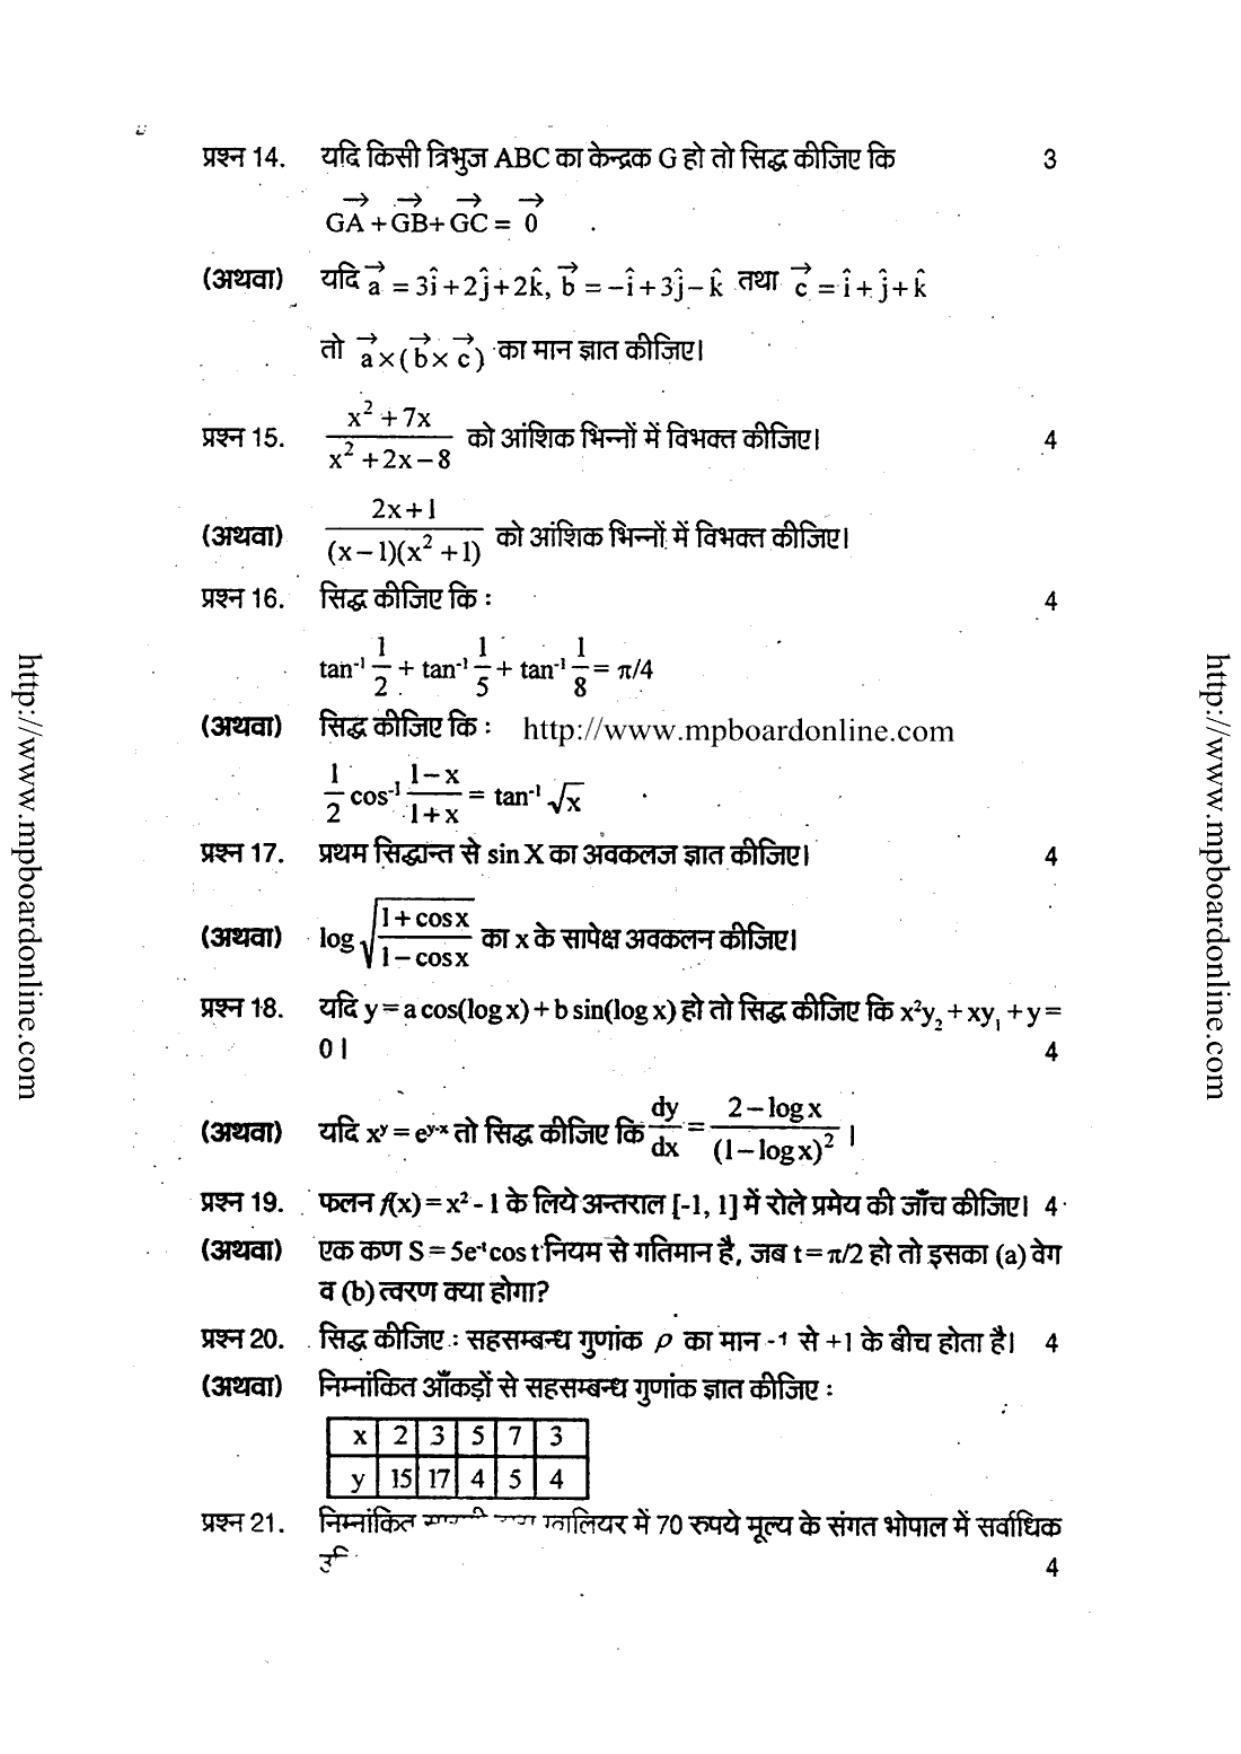 MP Board Class 12 Higher Mathematics 2018 Question Paper - Page 4